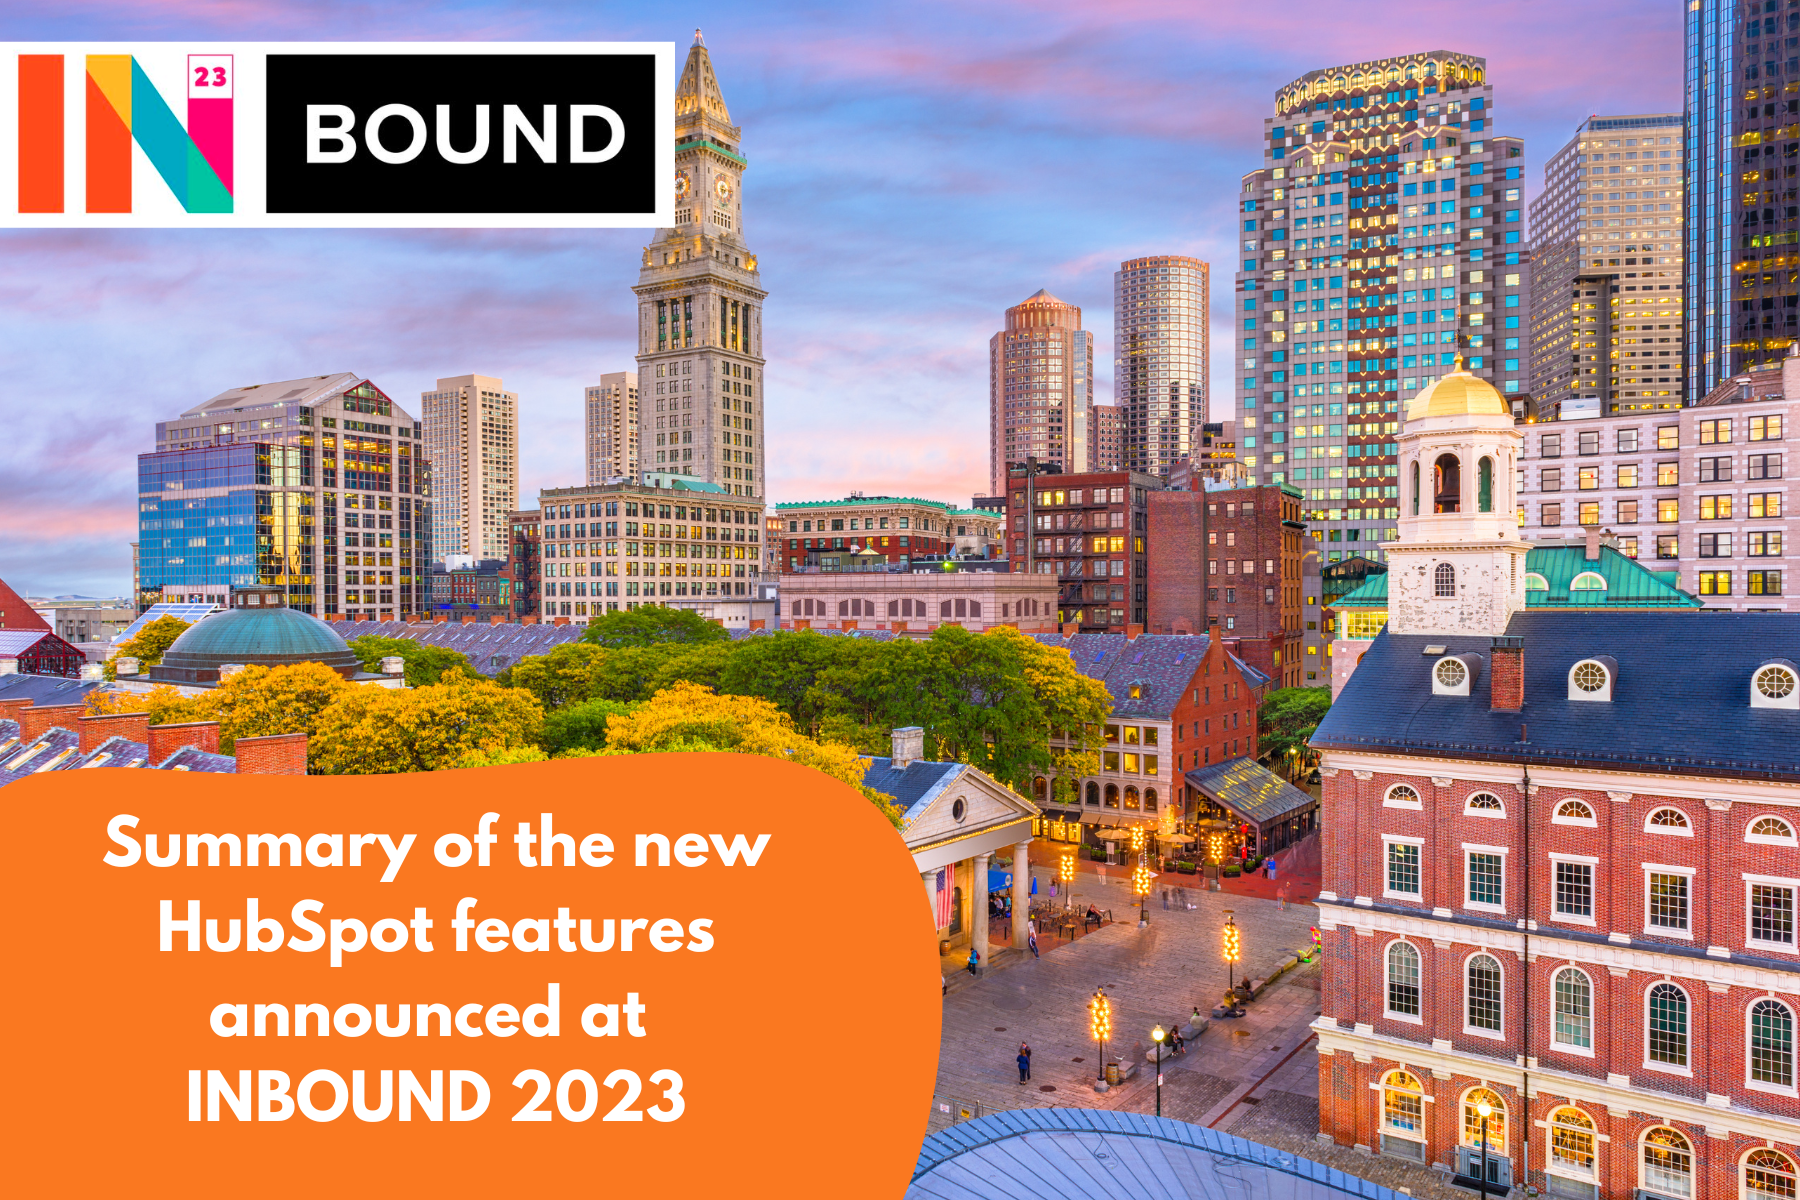 New HubSpot features announced at INBOUND 23